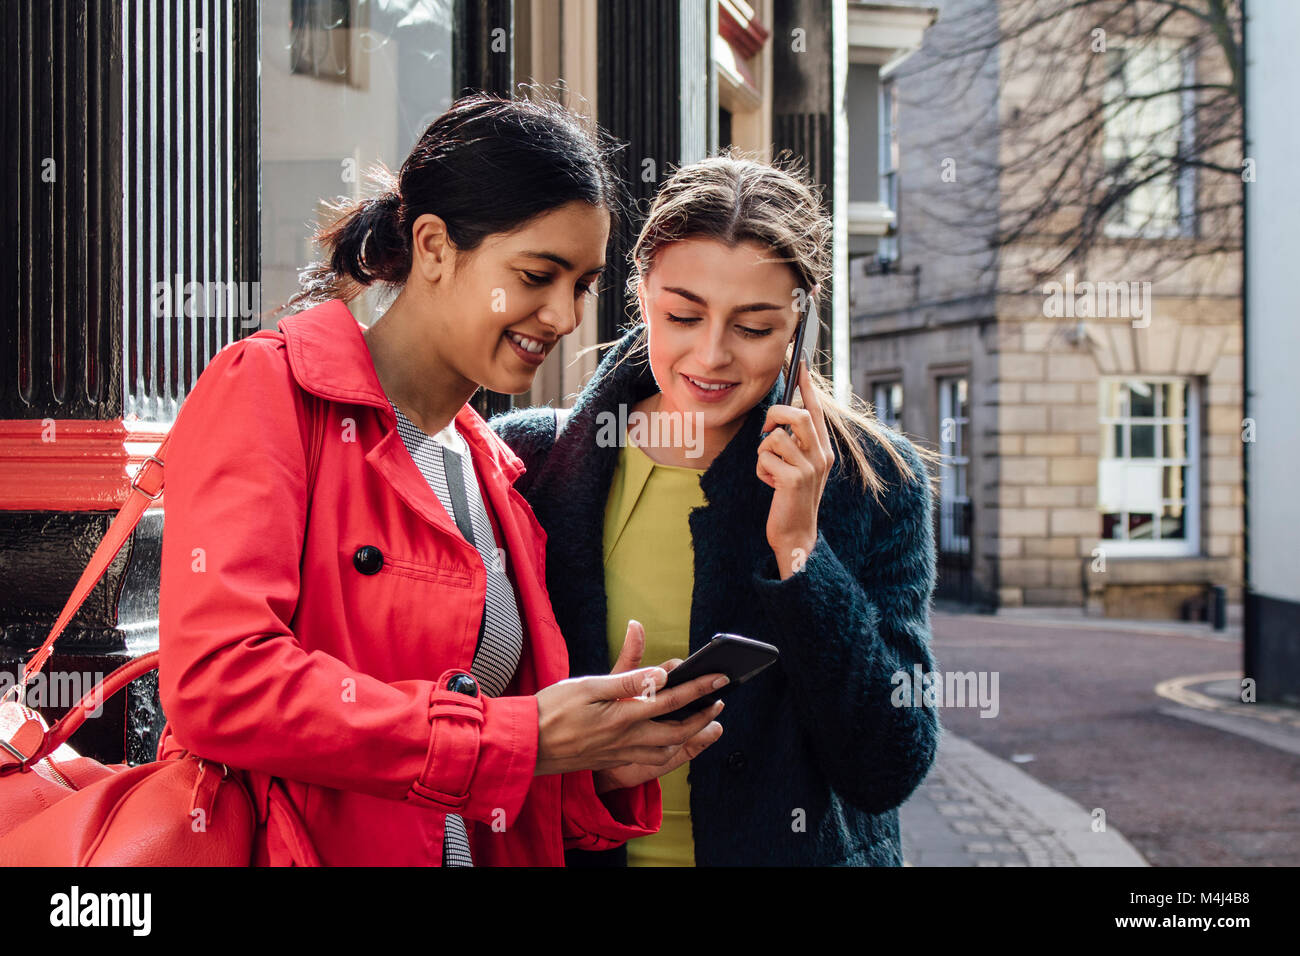 Two businesswomen are organising transport to work. One of the women is holding her smart phone which they are both looking at. The other girl is talk Stock Photo